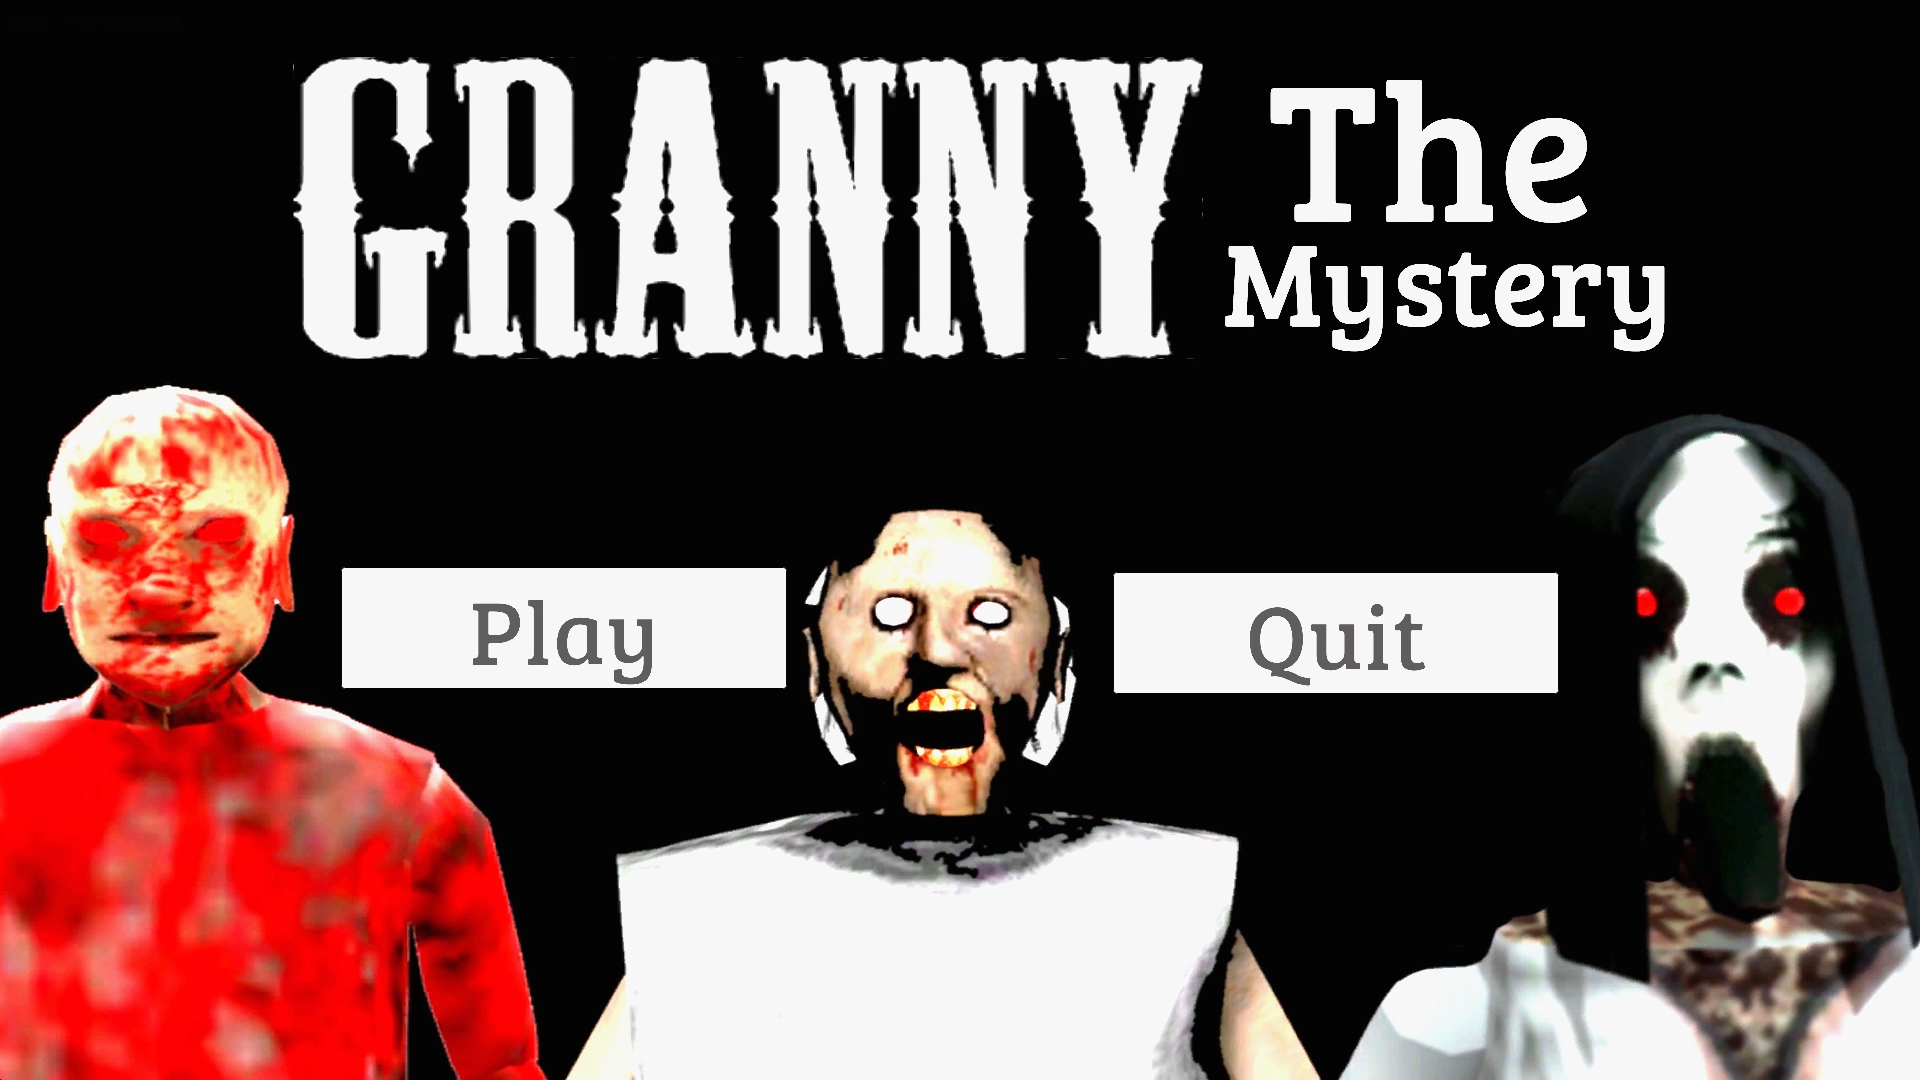 Granny The Mystery by Fasnox